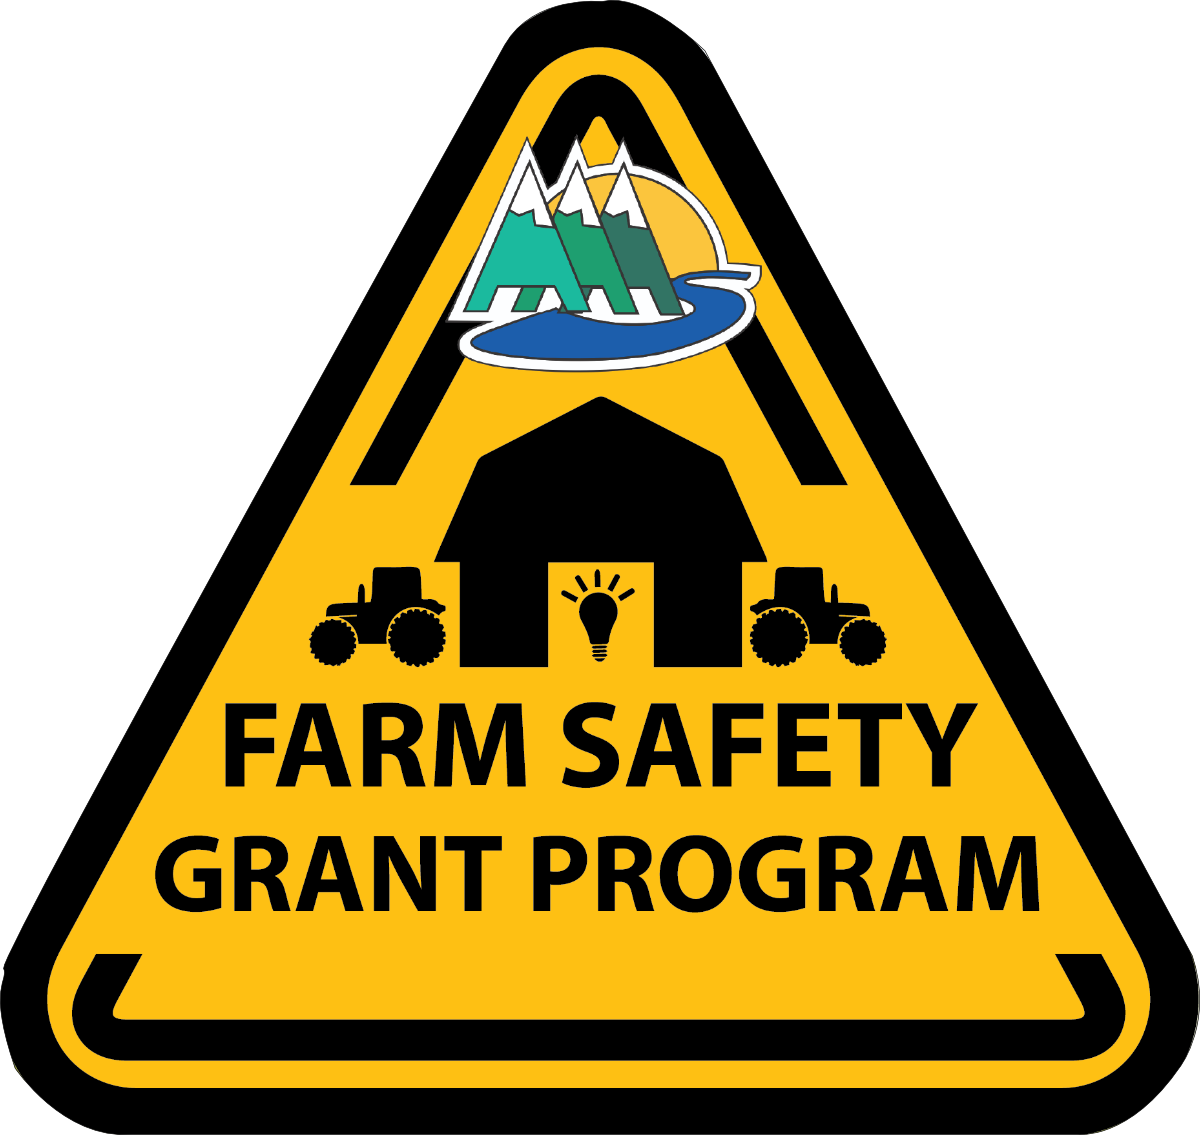 Featured Image for “AAAS Farm Safety Grant Program”